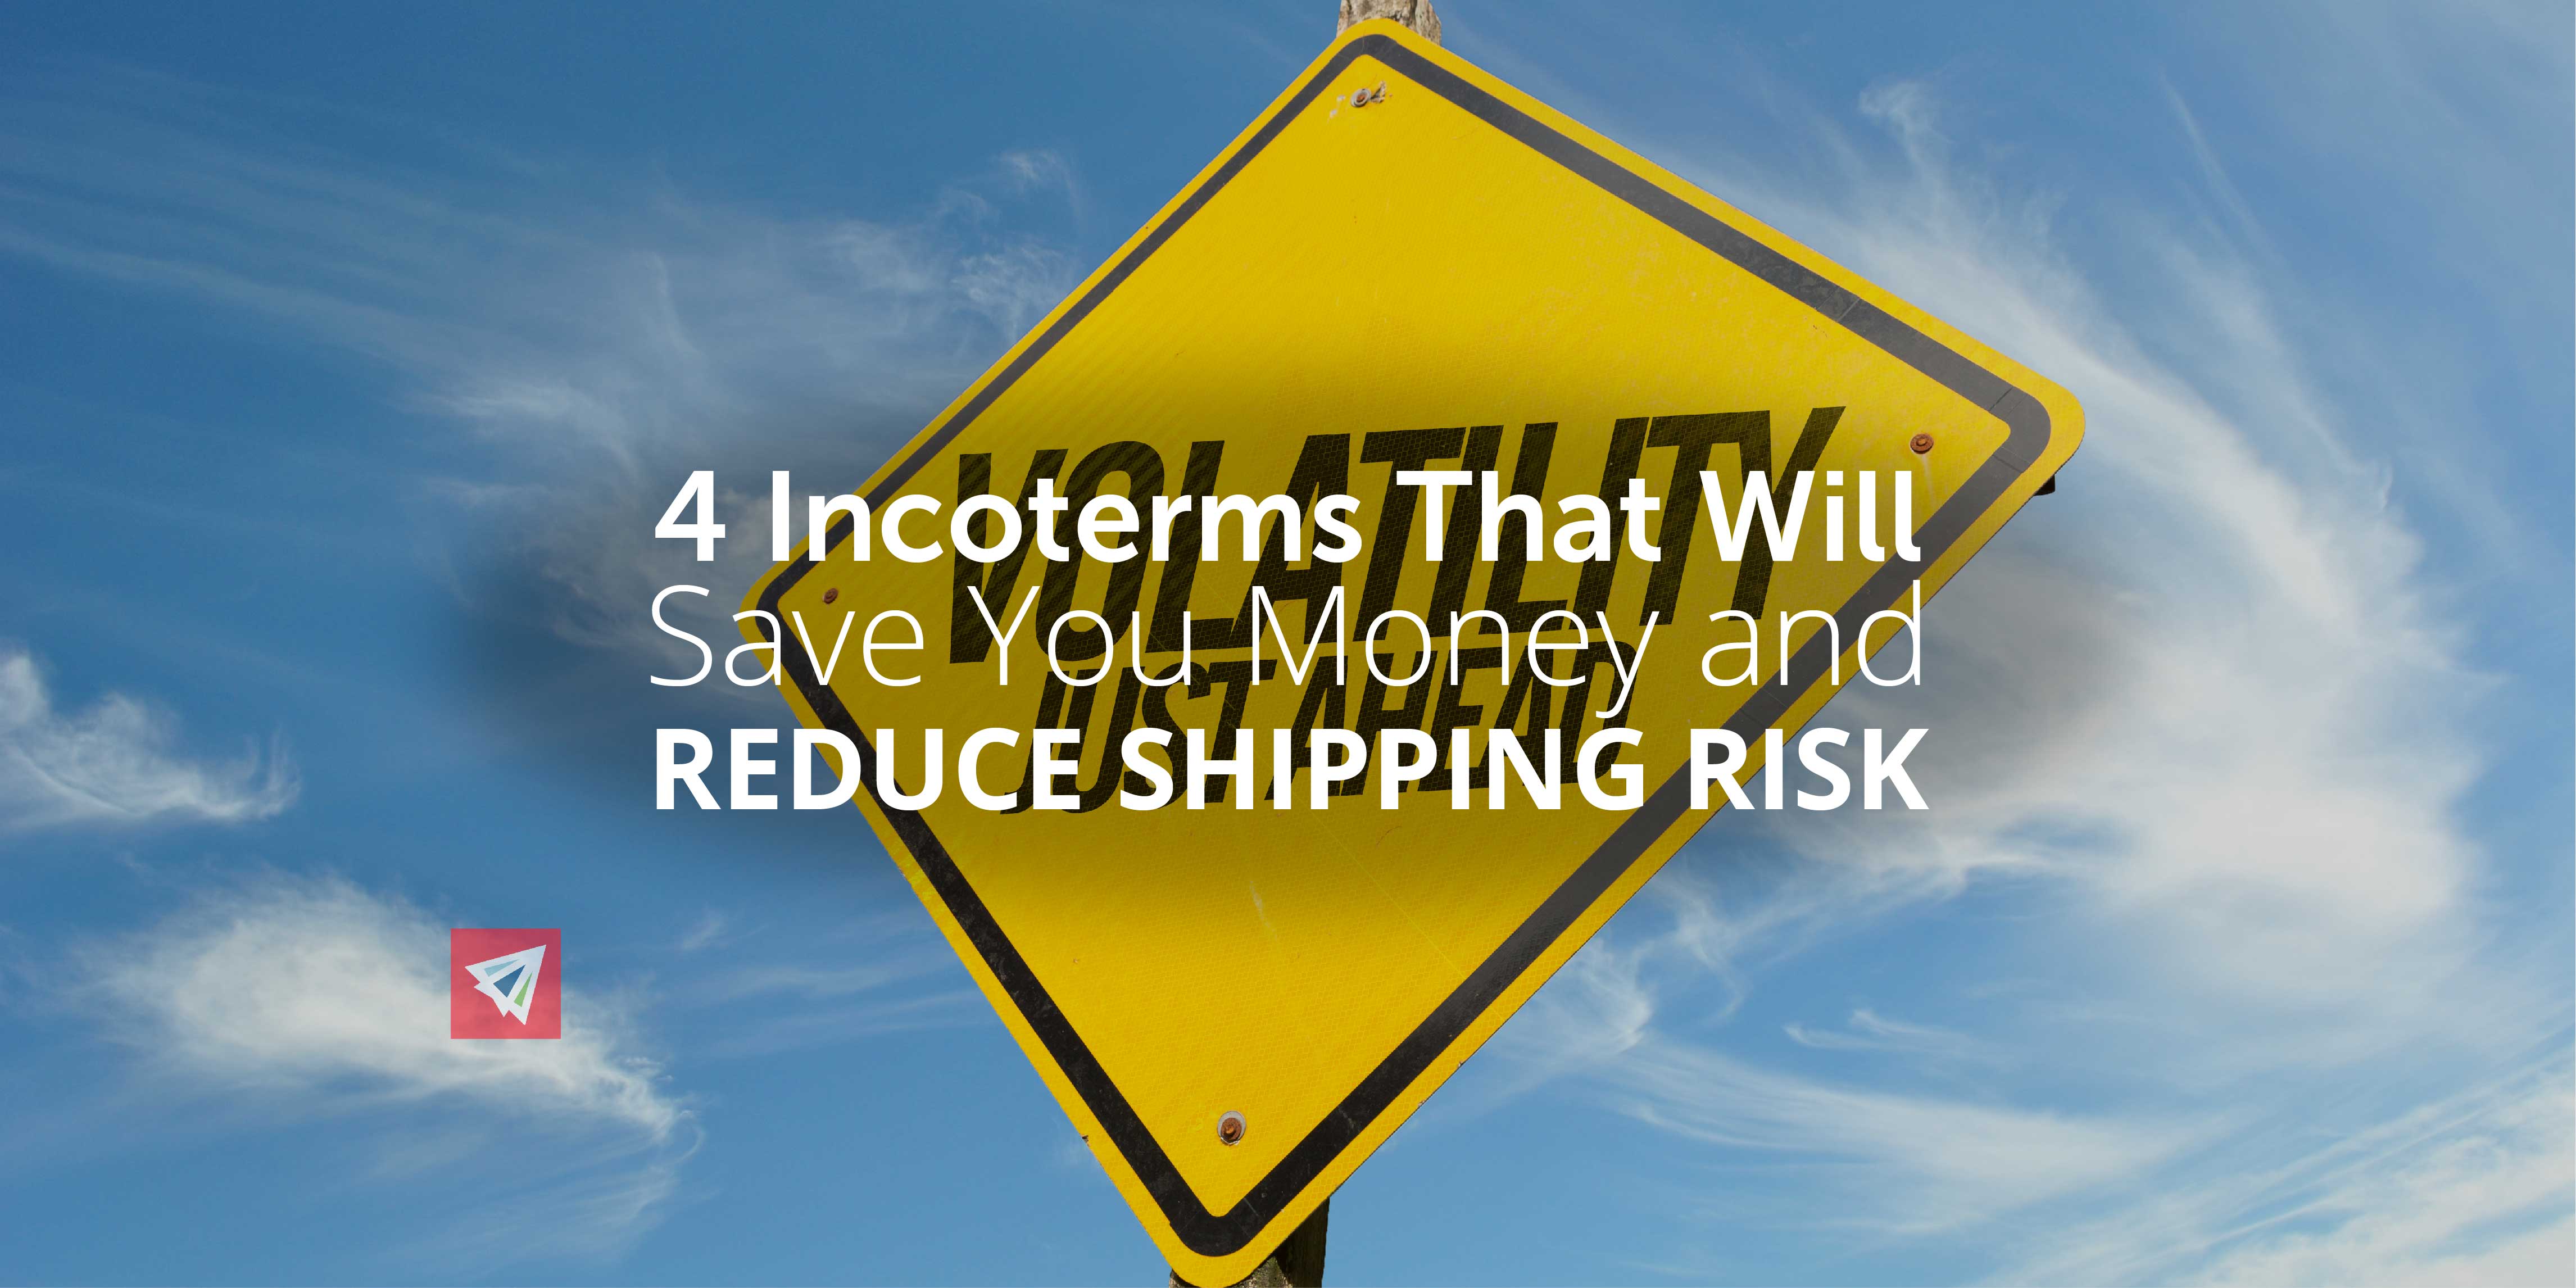 4 Incoterms that will Save You Money and Reduec Shipping Risk